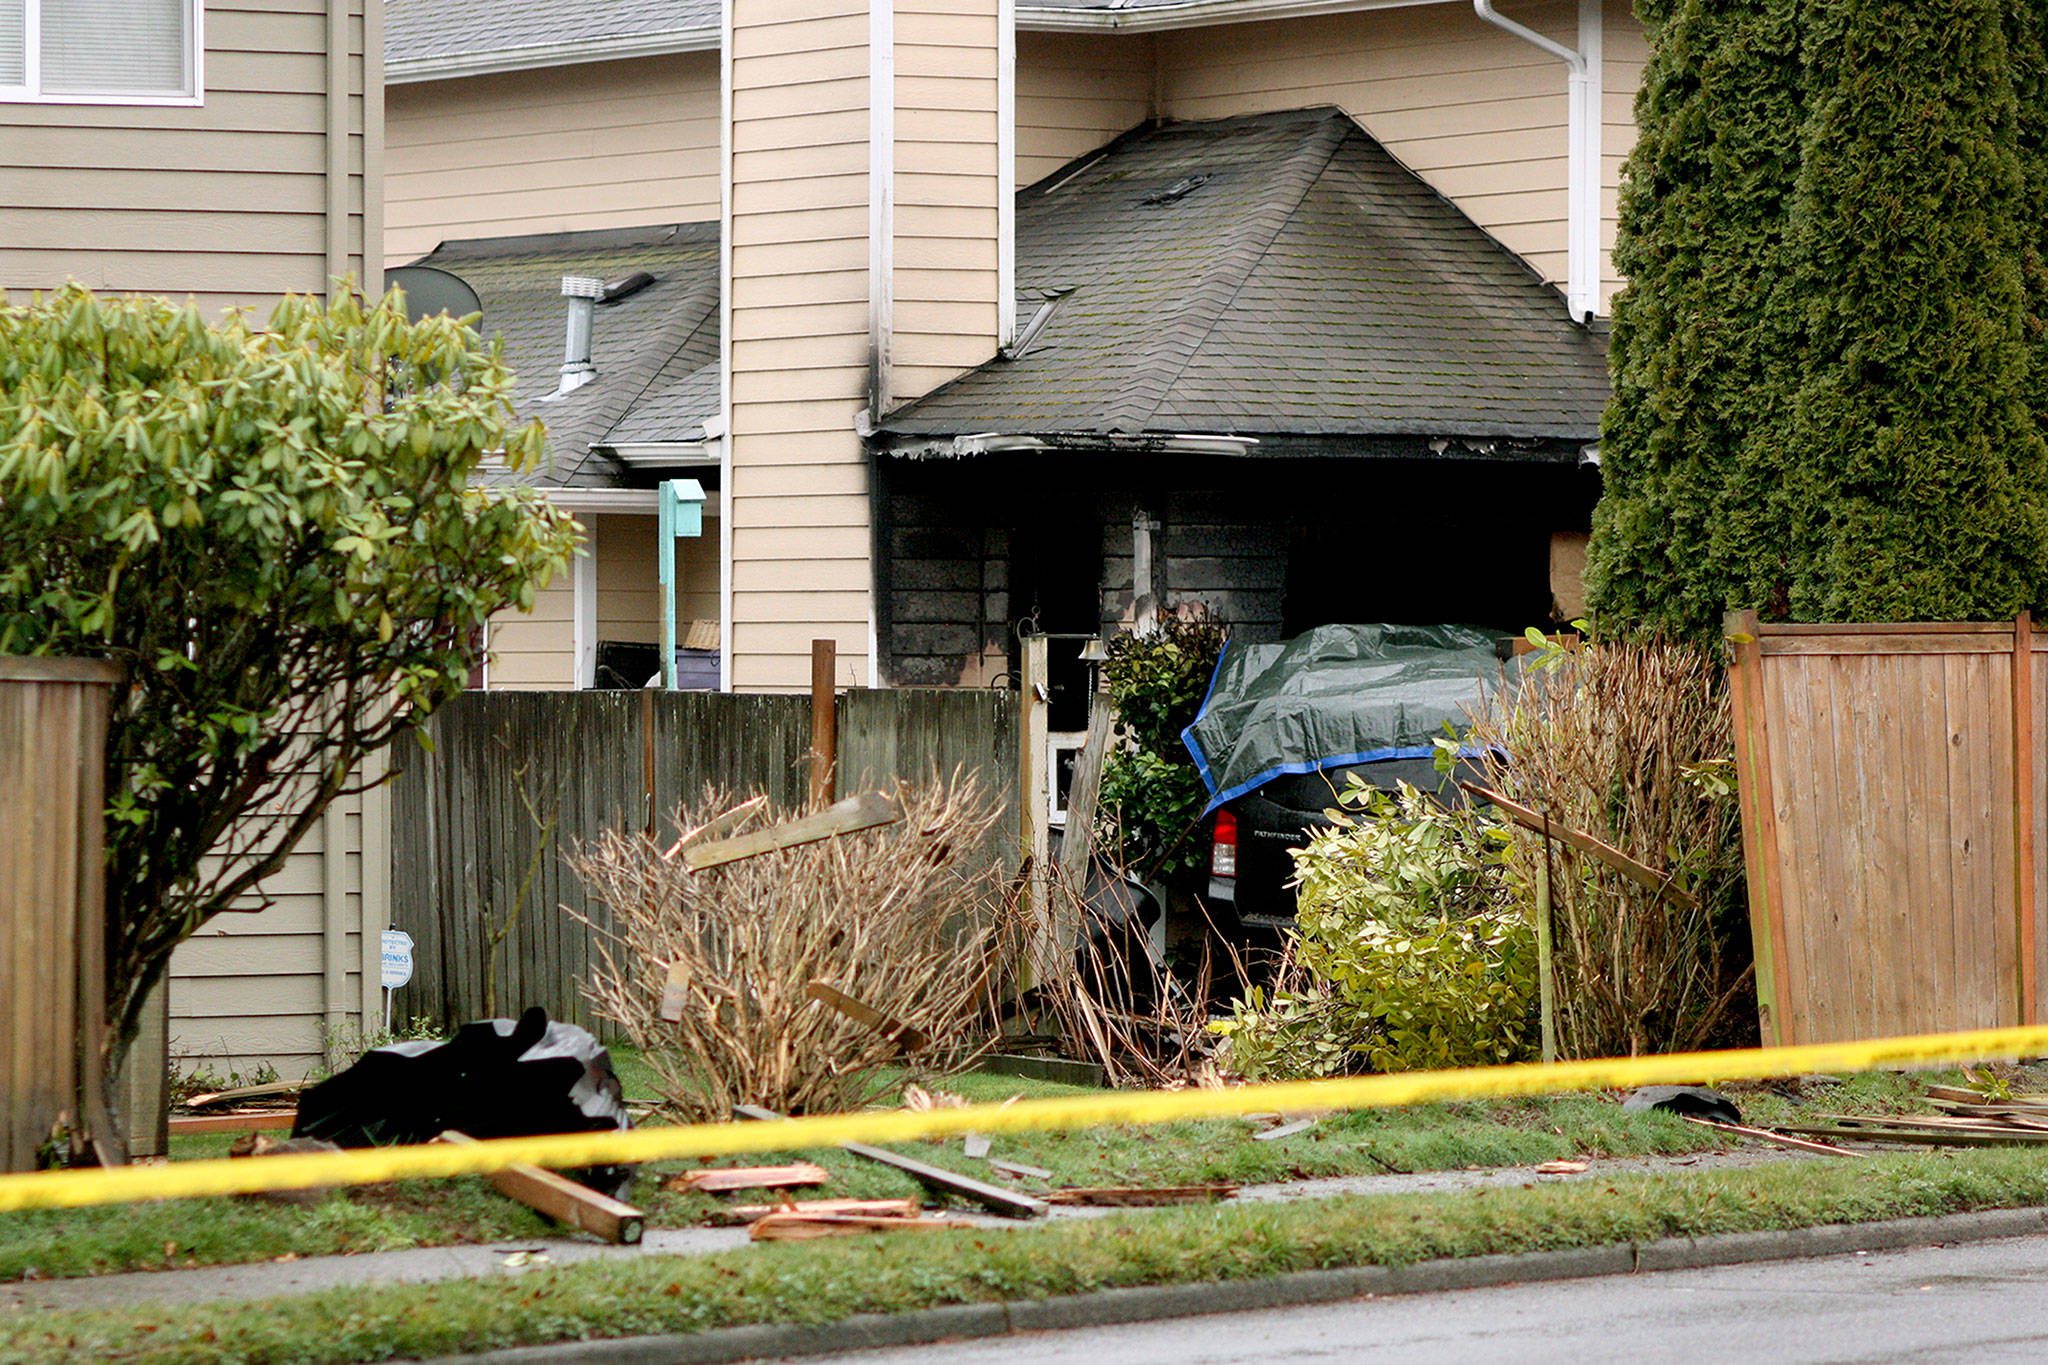 A car crashed through a power pole and into a house in Mountlake Terrace on Monday. A person in the car died, and the accident started a fire at the home. (Zachariah Bryan / The Herald)